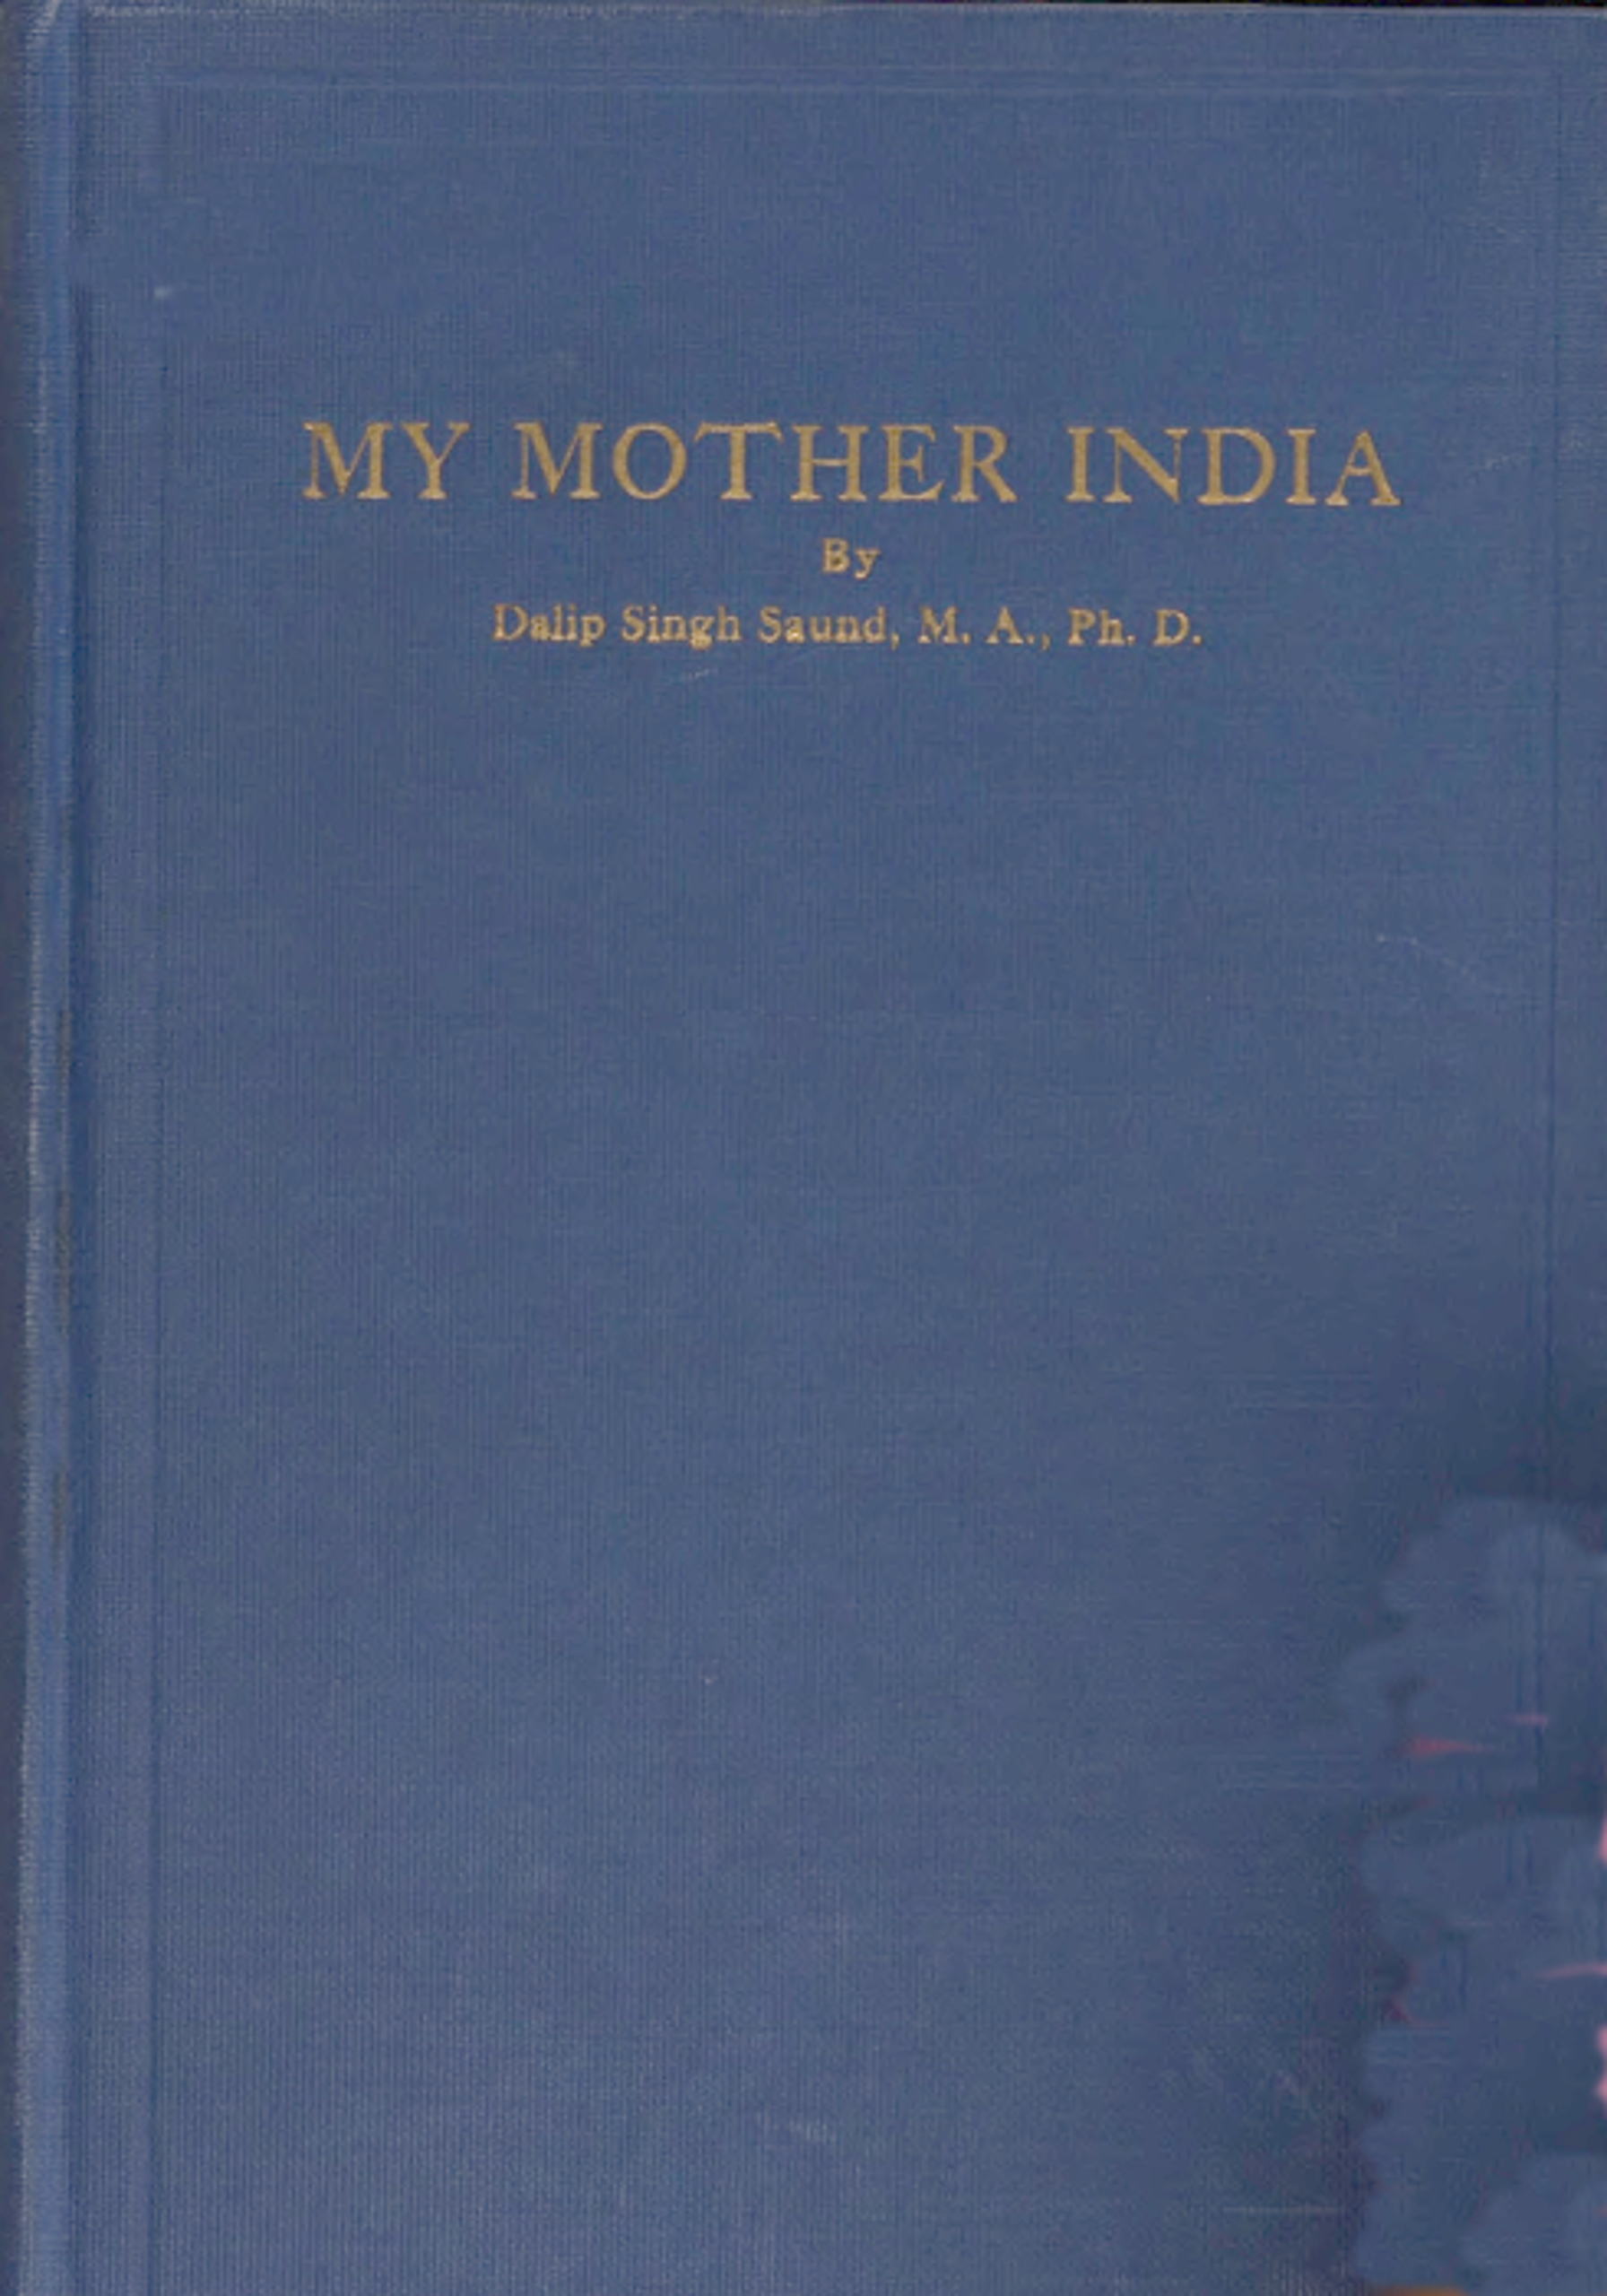 My mother India